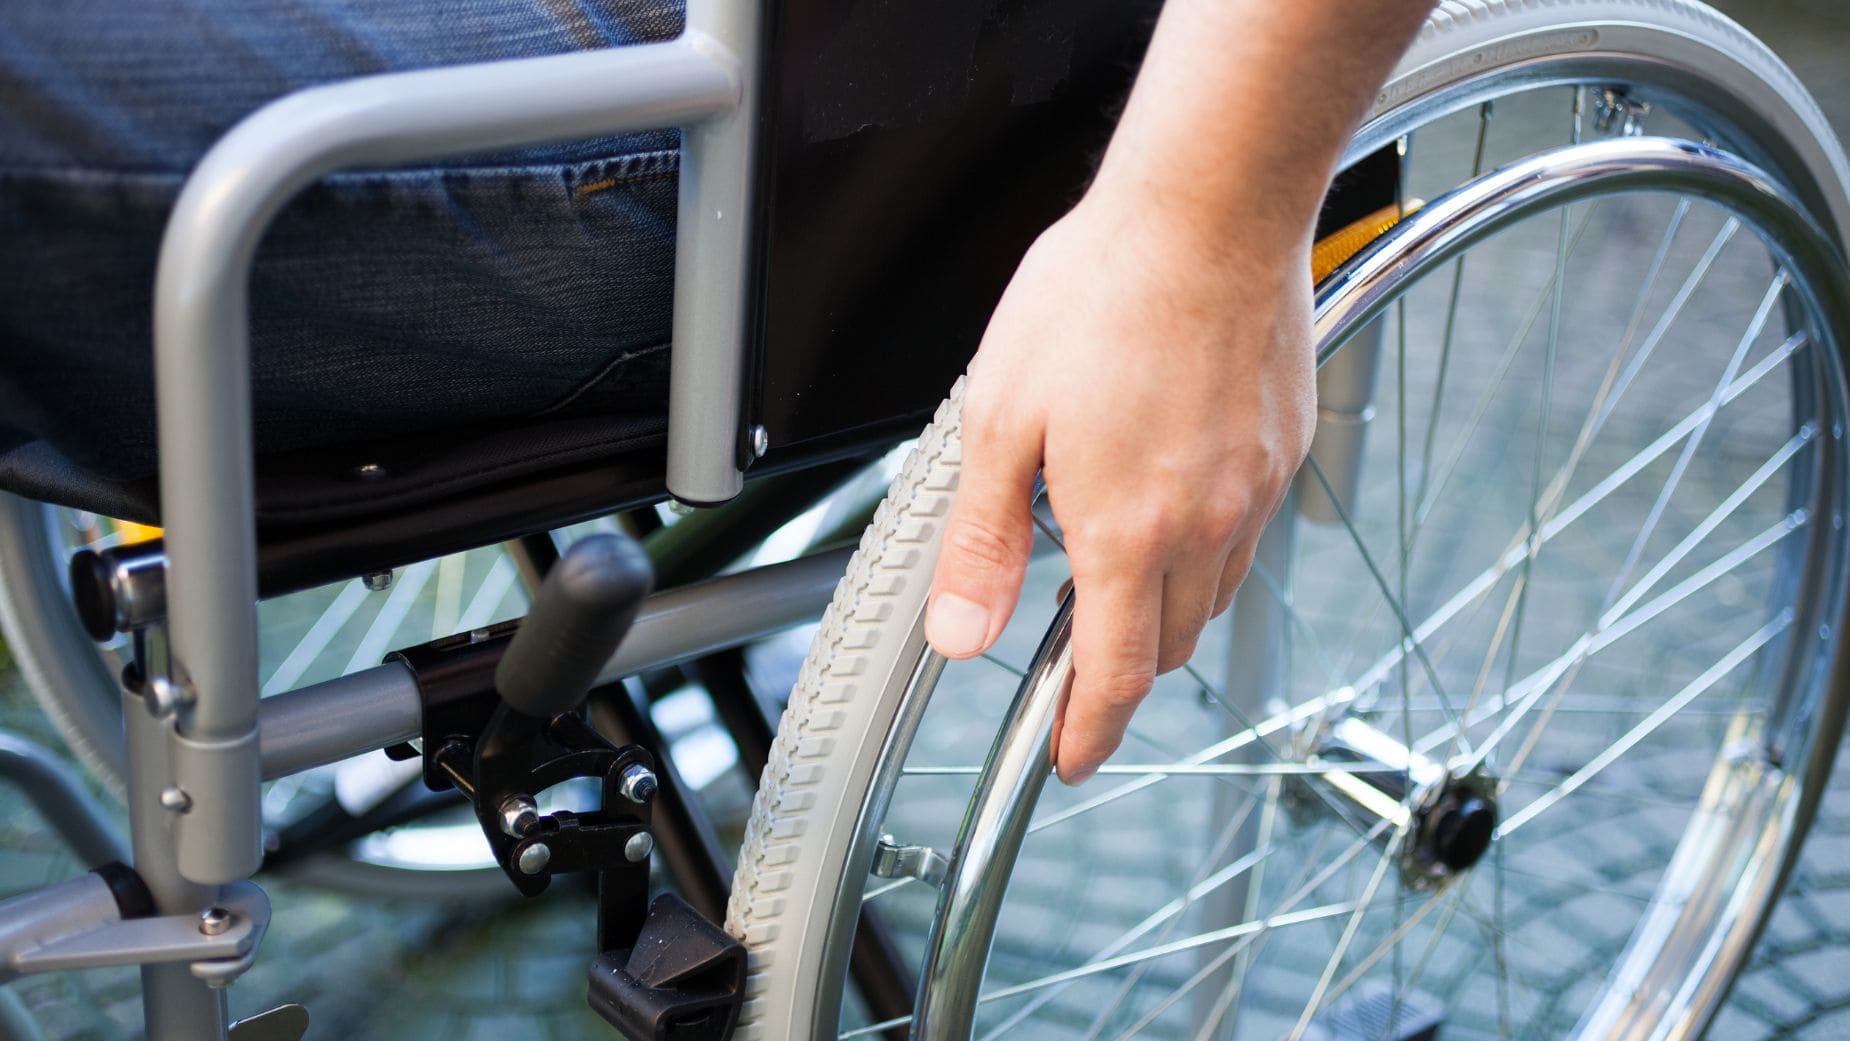 Disability Benefits will arrive really soon if you meet the requirements